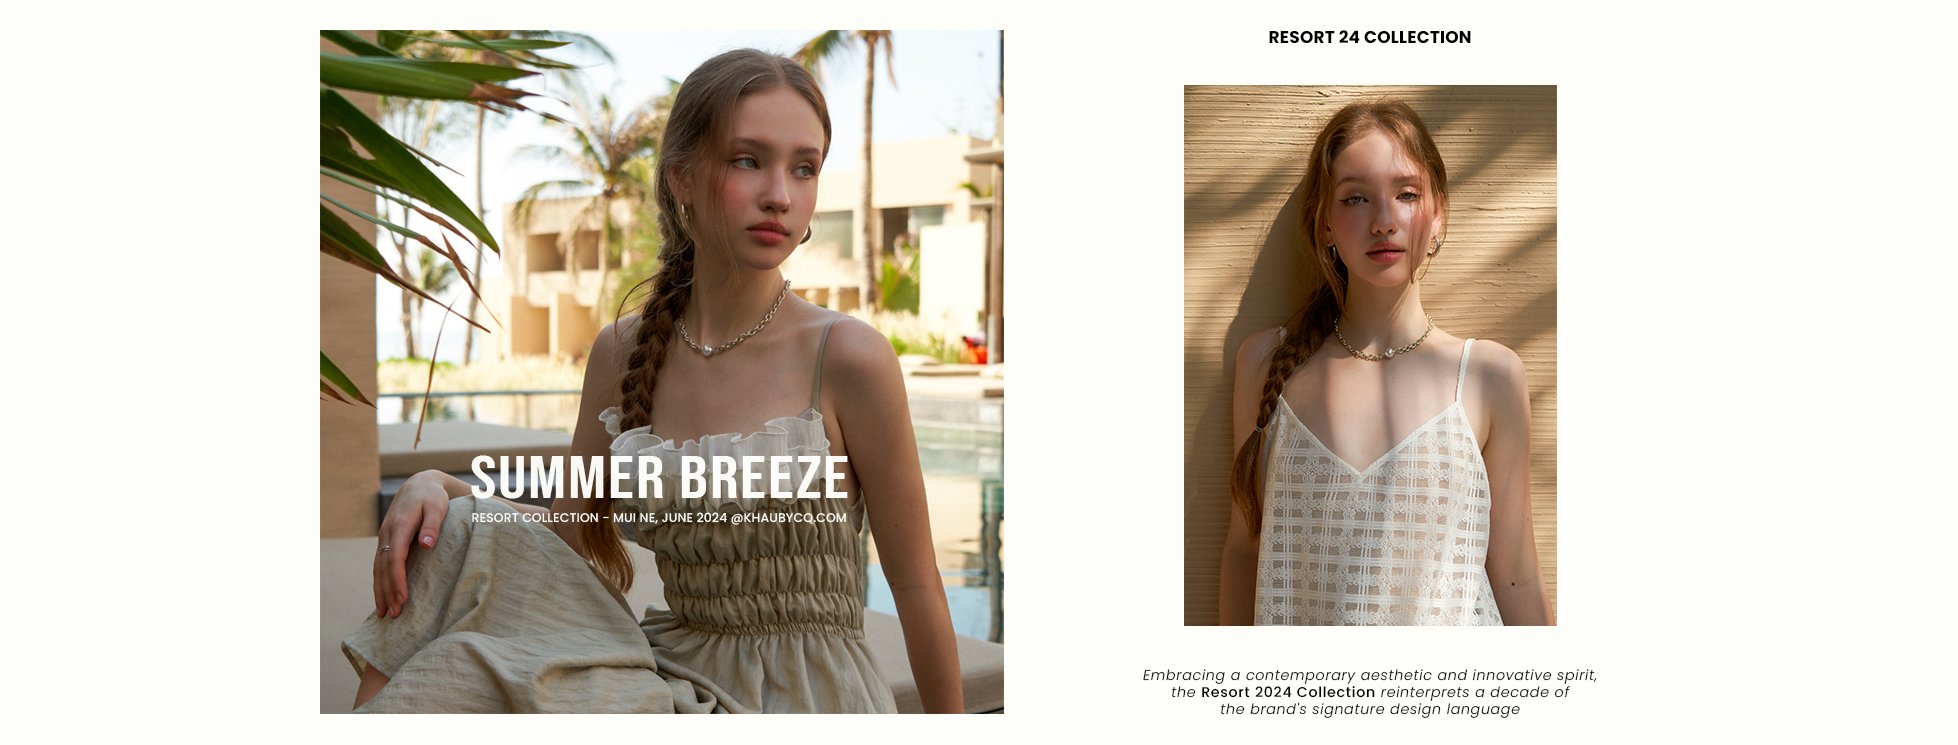 [CAMPAIGN] 'SUMMER BREEZE' RESORT COLLECTION 2024